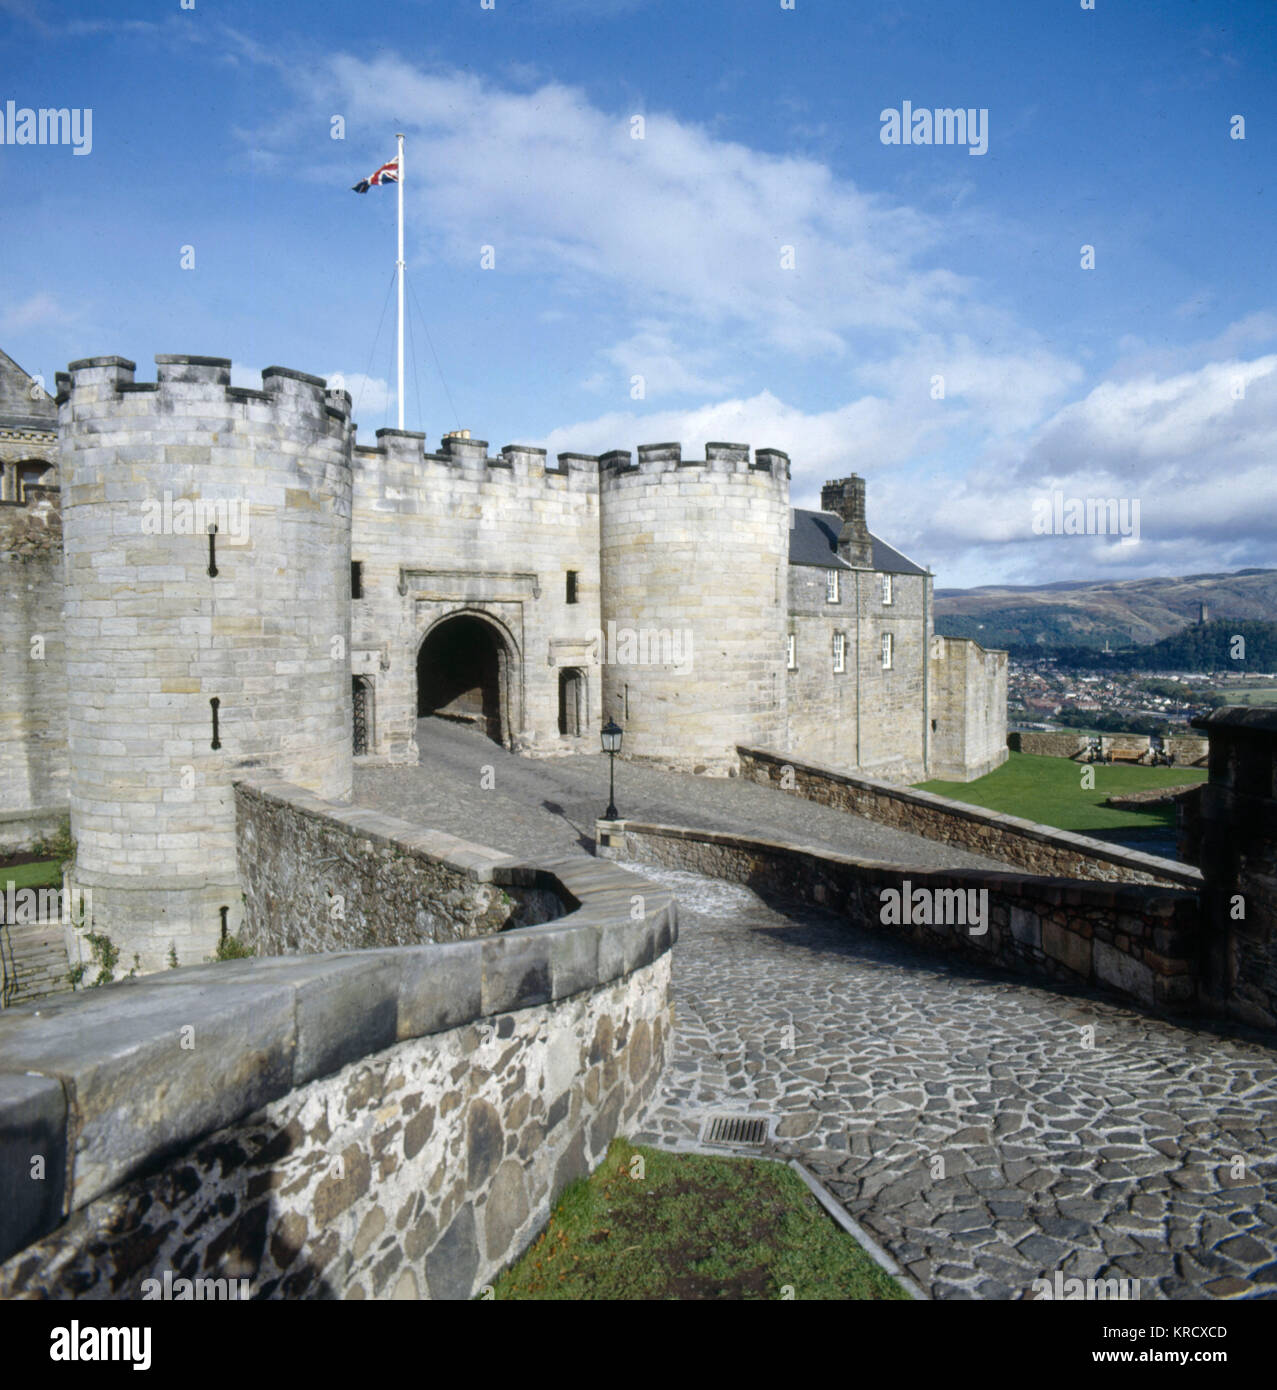 The Gatehouse, Stirling  Castle. The Scots regained possession from the English following Wallace's victory at Stirling Bridge in 1297. His memorial is on the right.     Date: 1983 Stock Photo